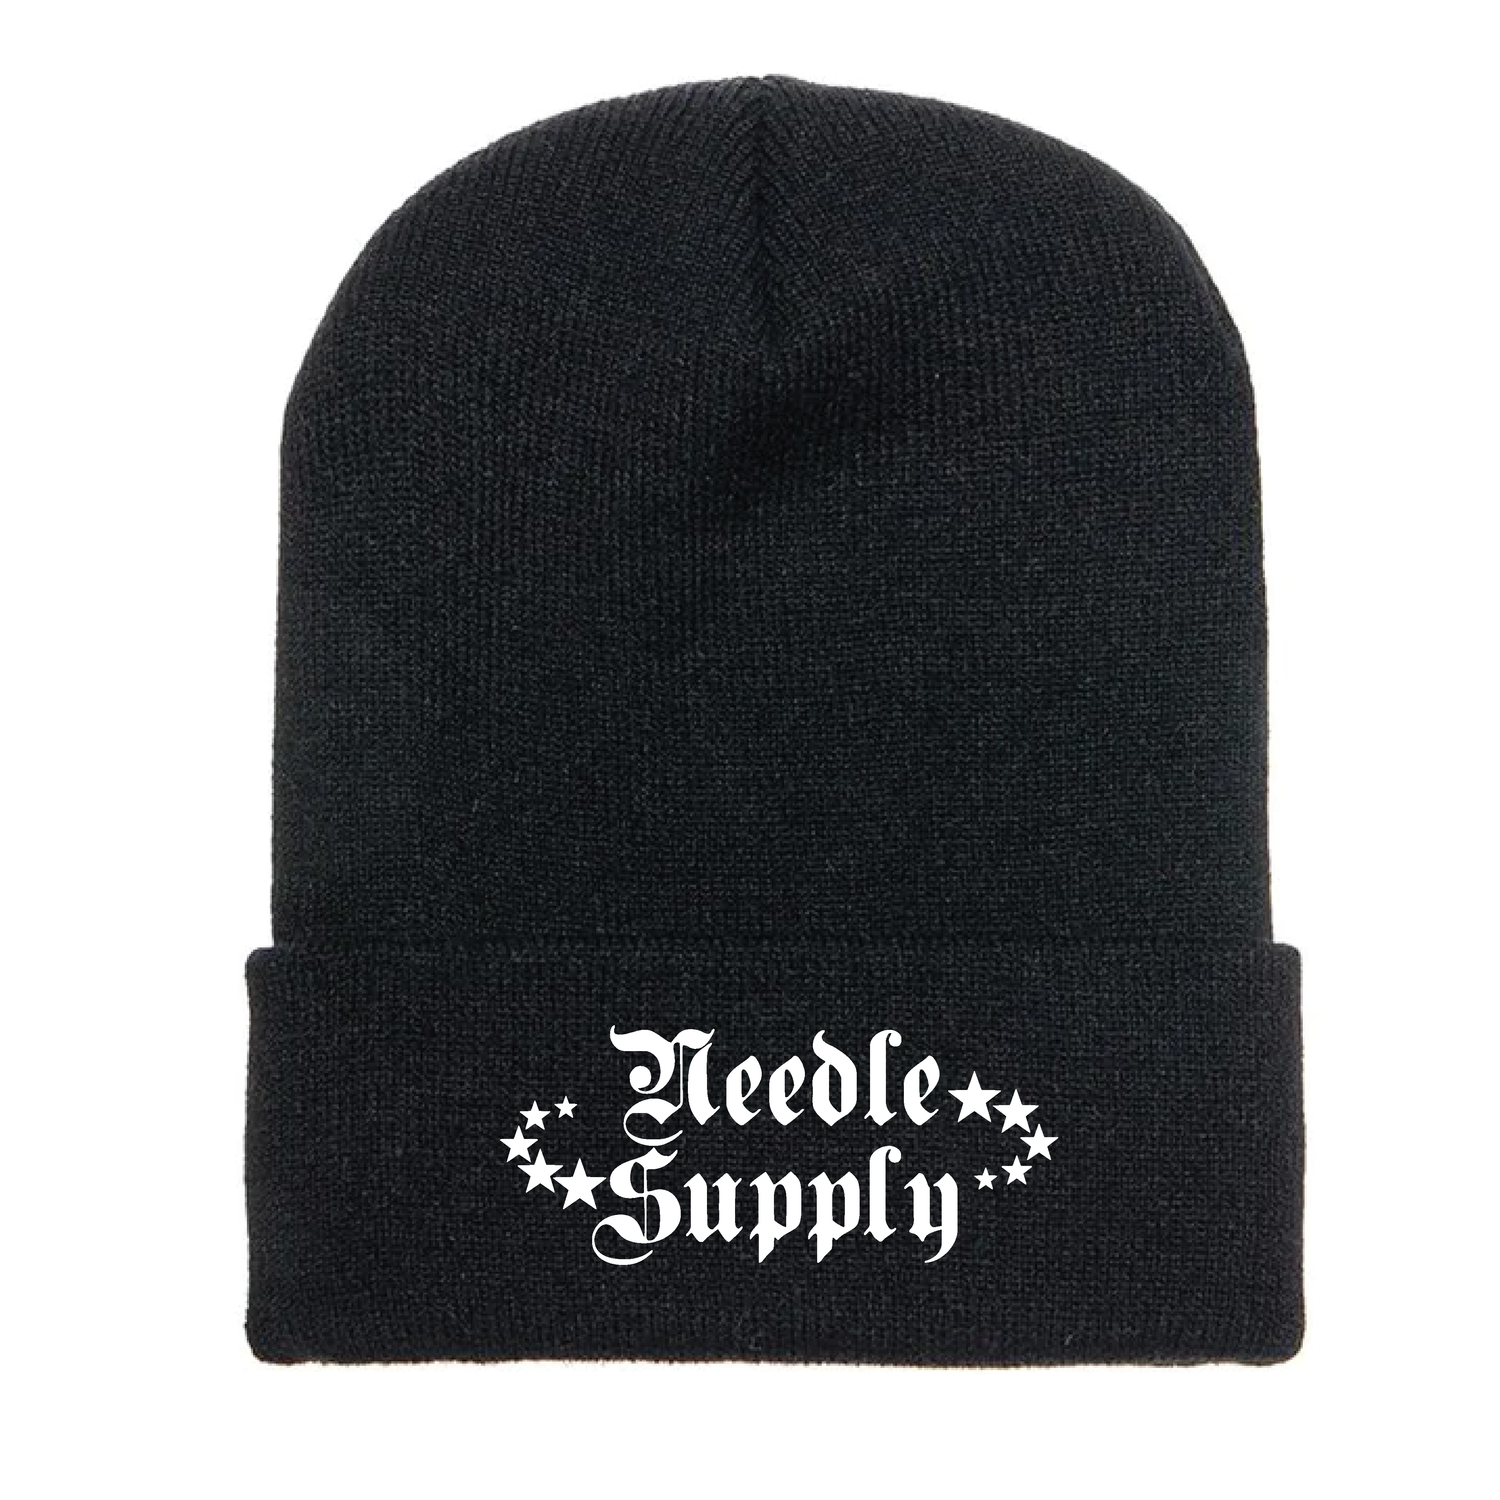 Needle Supply Logo - Embroidered Knit Beanie